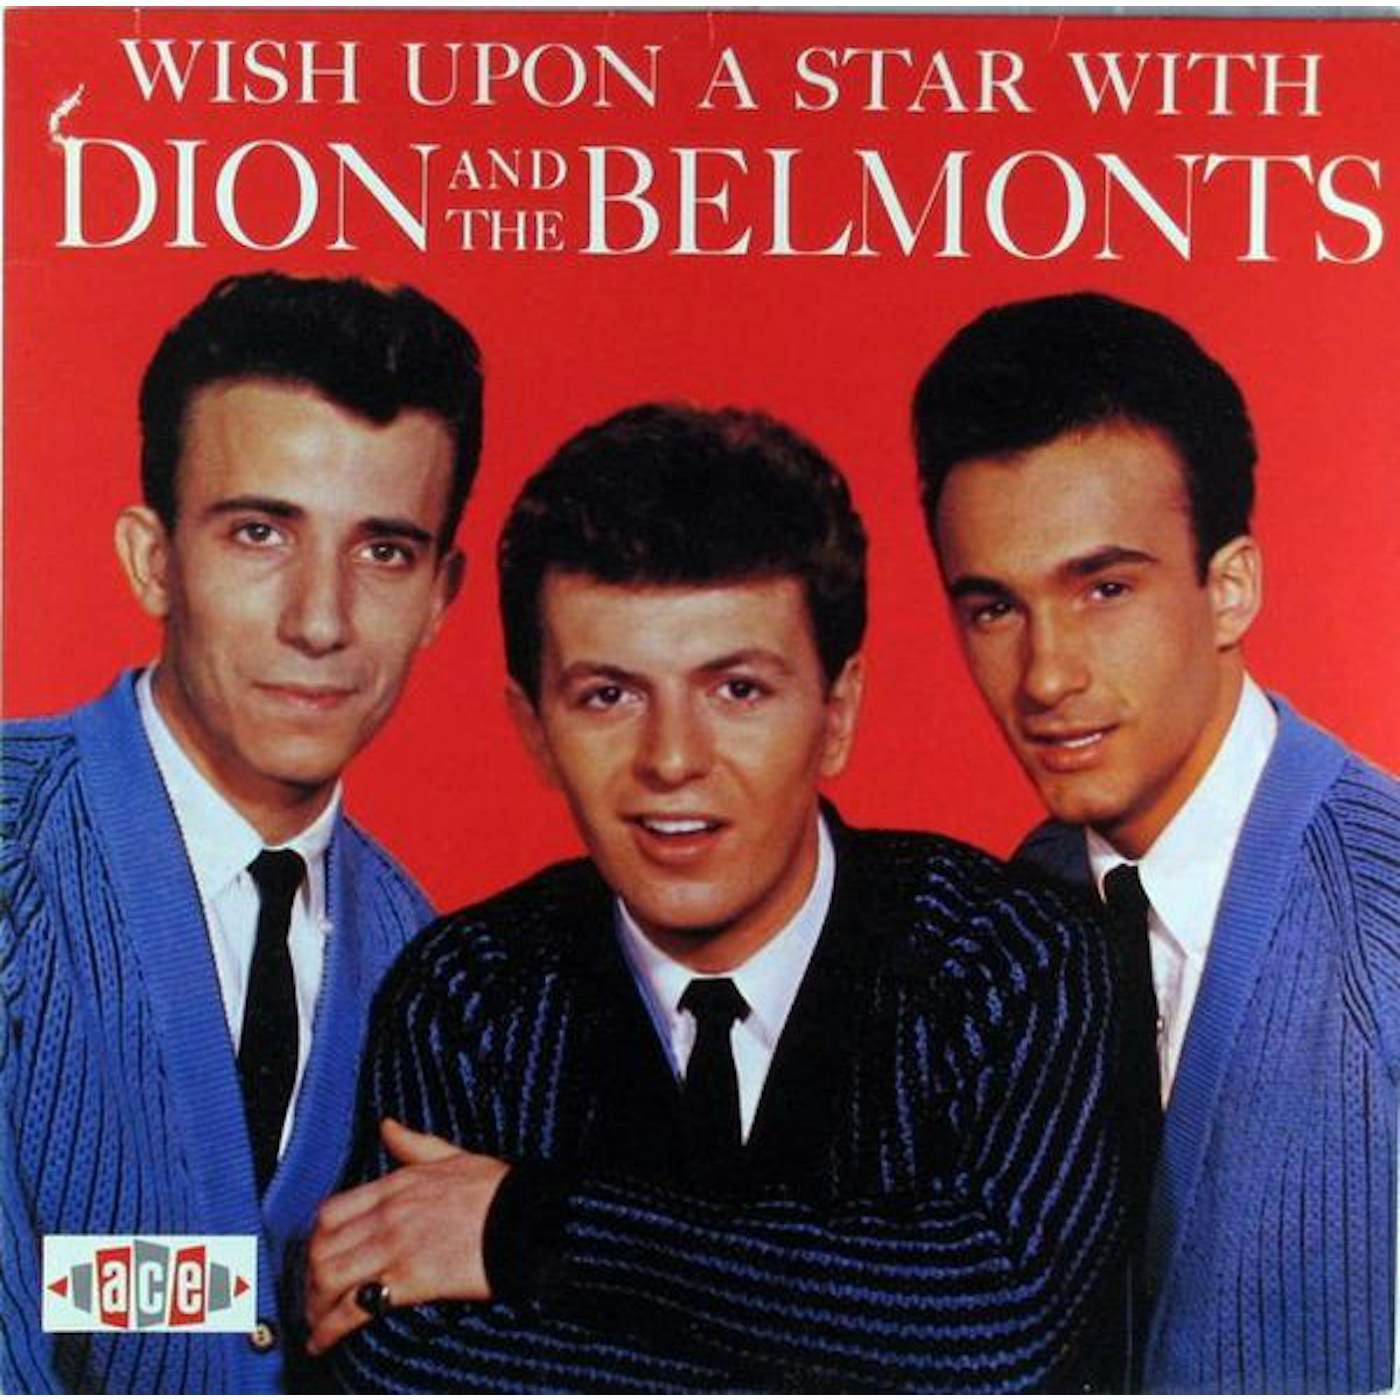 Dion & The Belmonts WISH UPON A STAR Vinyl Record